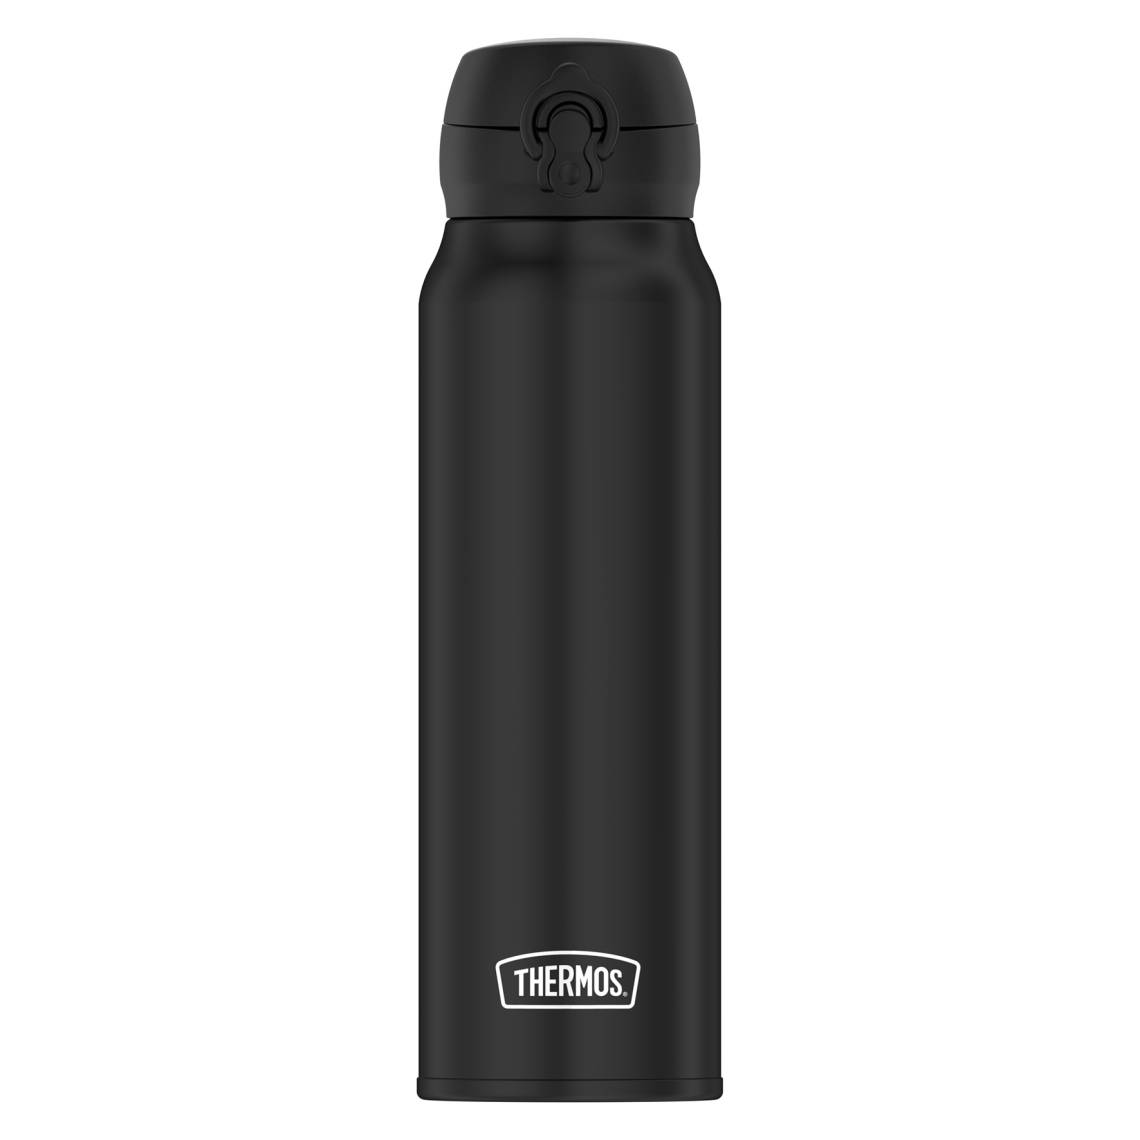 Thermos - Isolier-Trinkflasche Ultralight - charcoal , 0,75 Liter